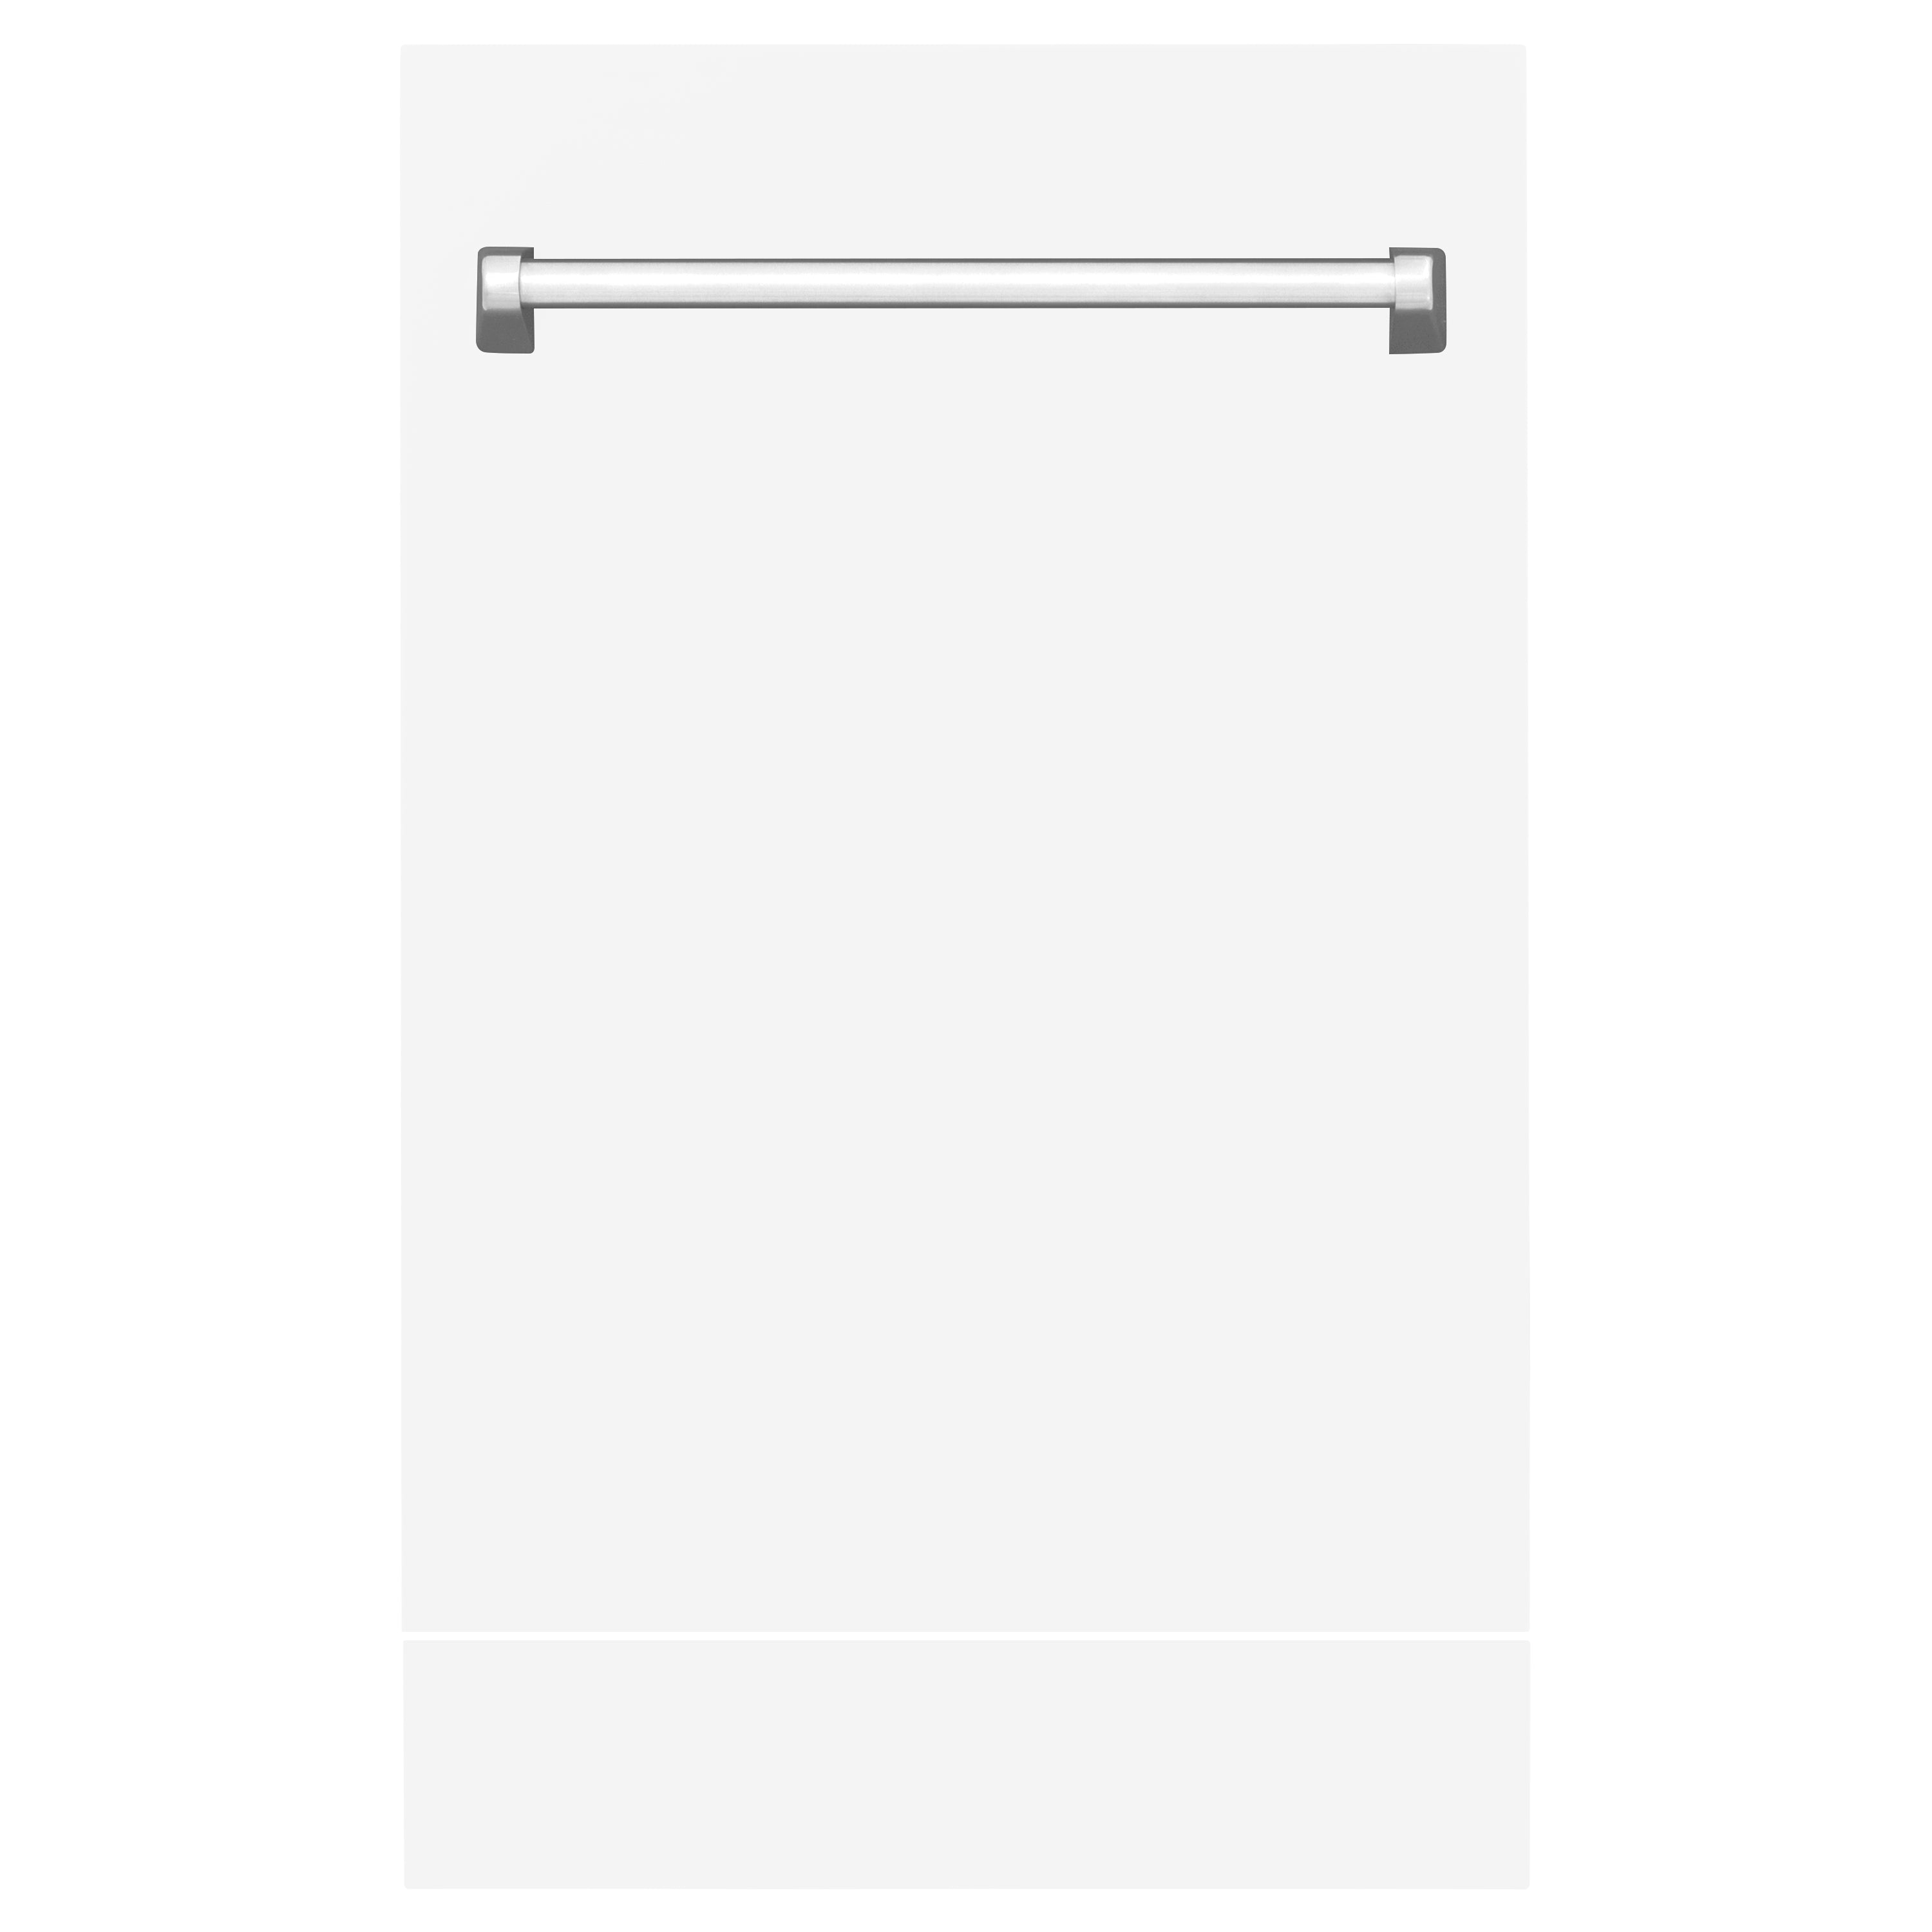 ZLINE 18" Tallac Dishwasher Panel in White Matte with Traditional Handle (DPV-WM-18)